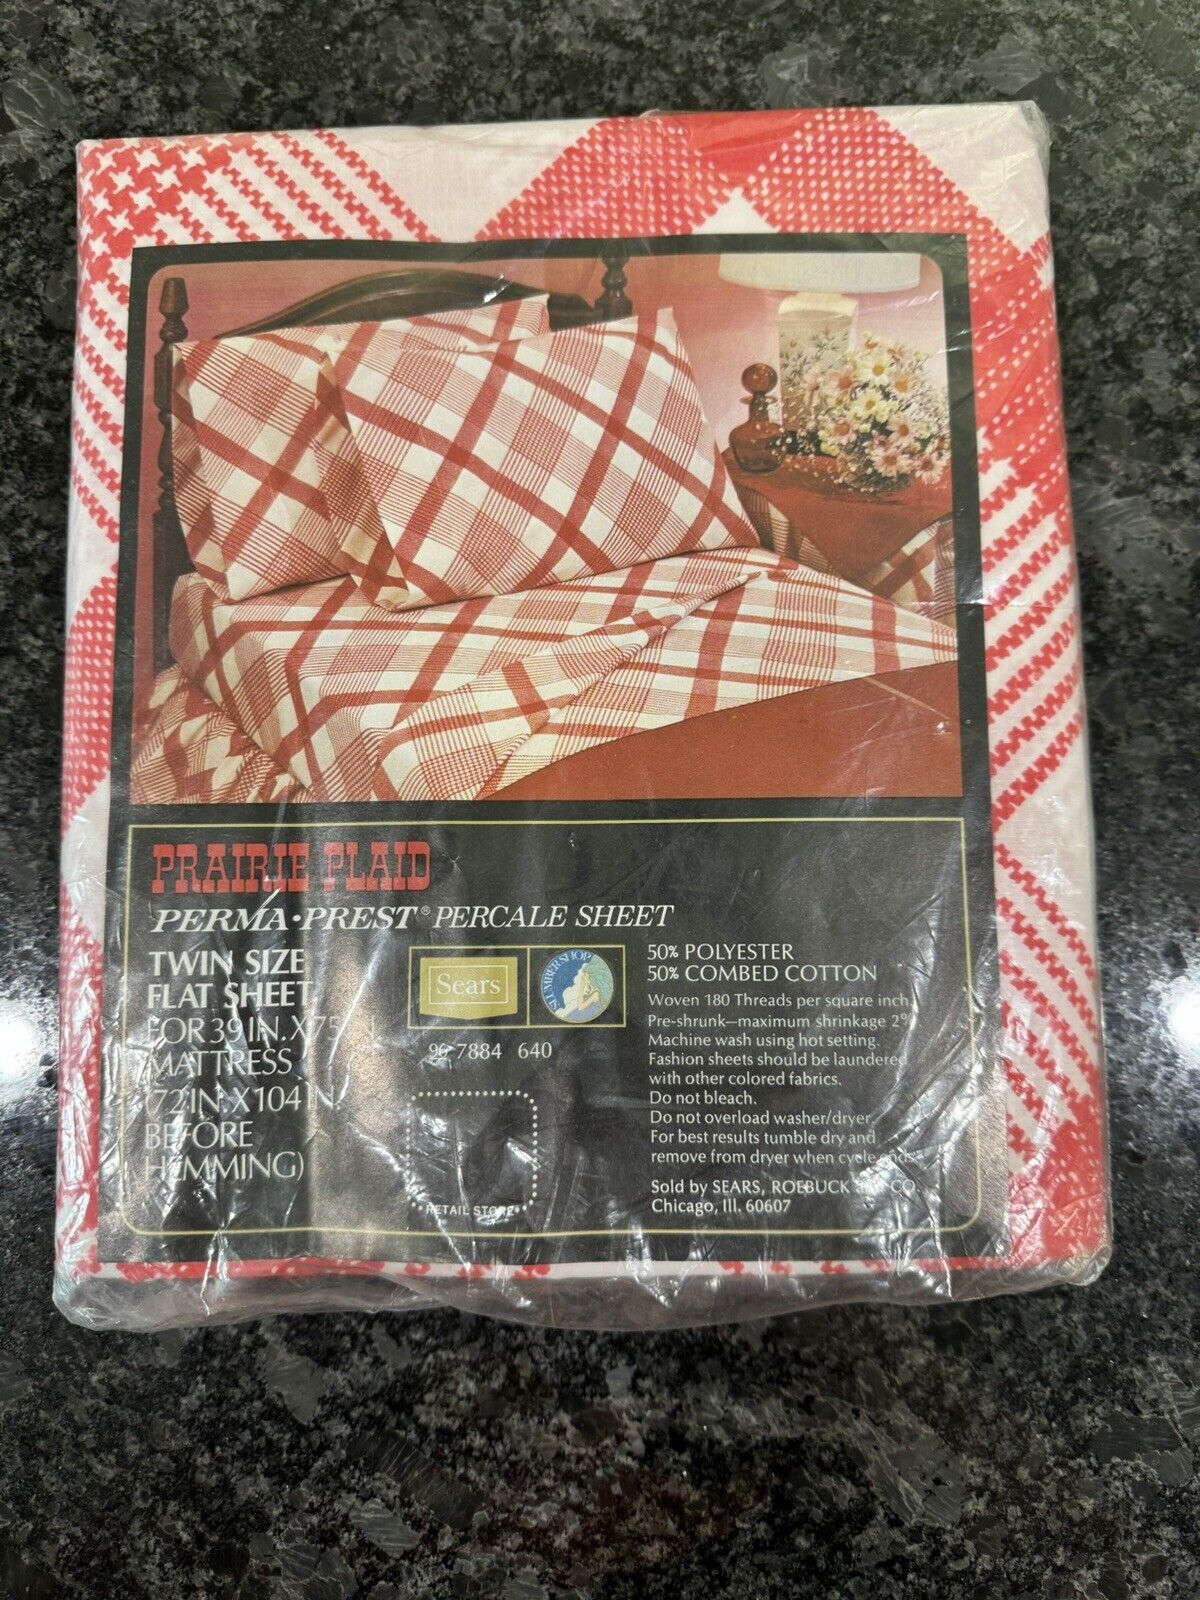 Vintage Sears Twin Size Flat Sheet Prairie Plaid Red Perma-Prest New in Package